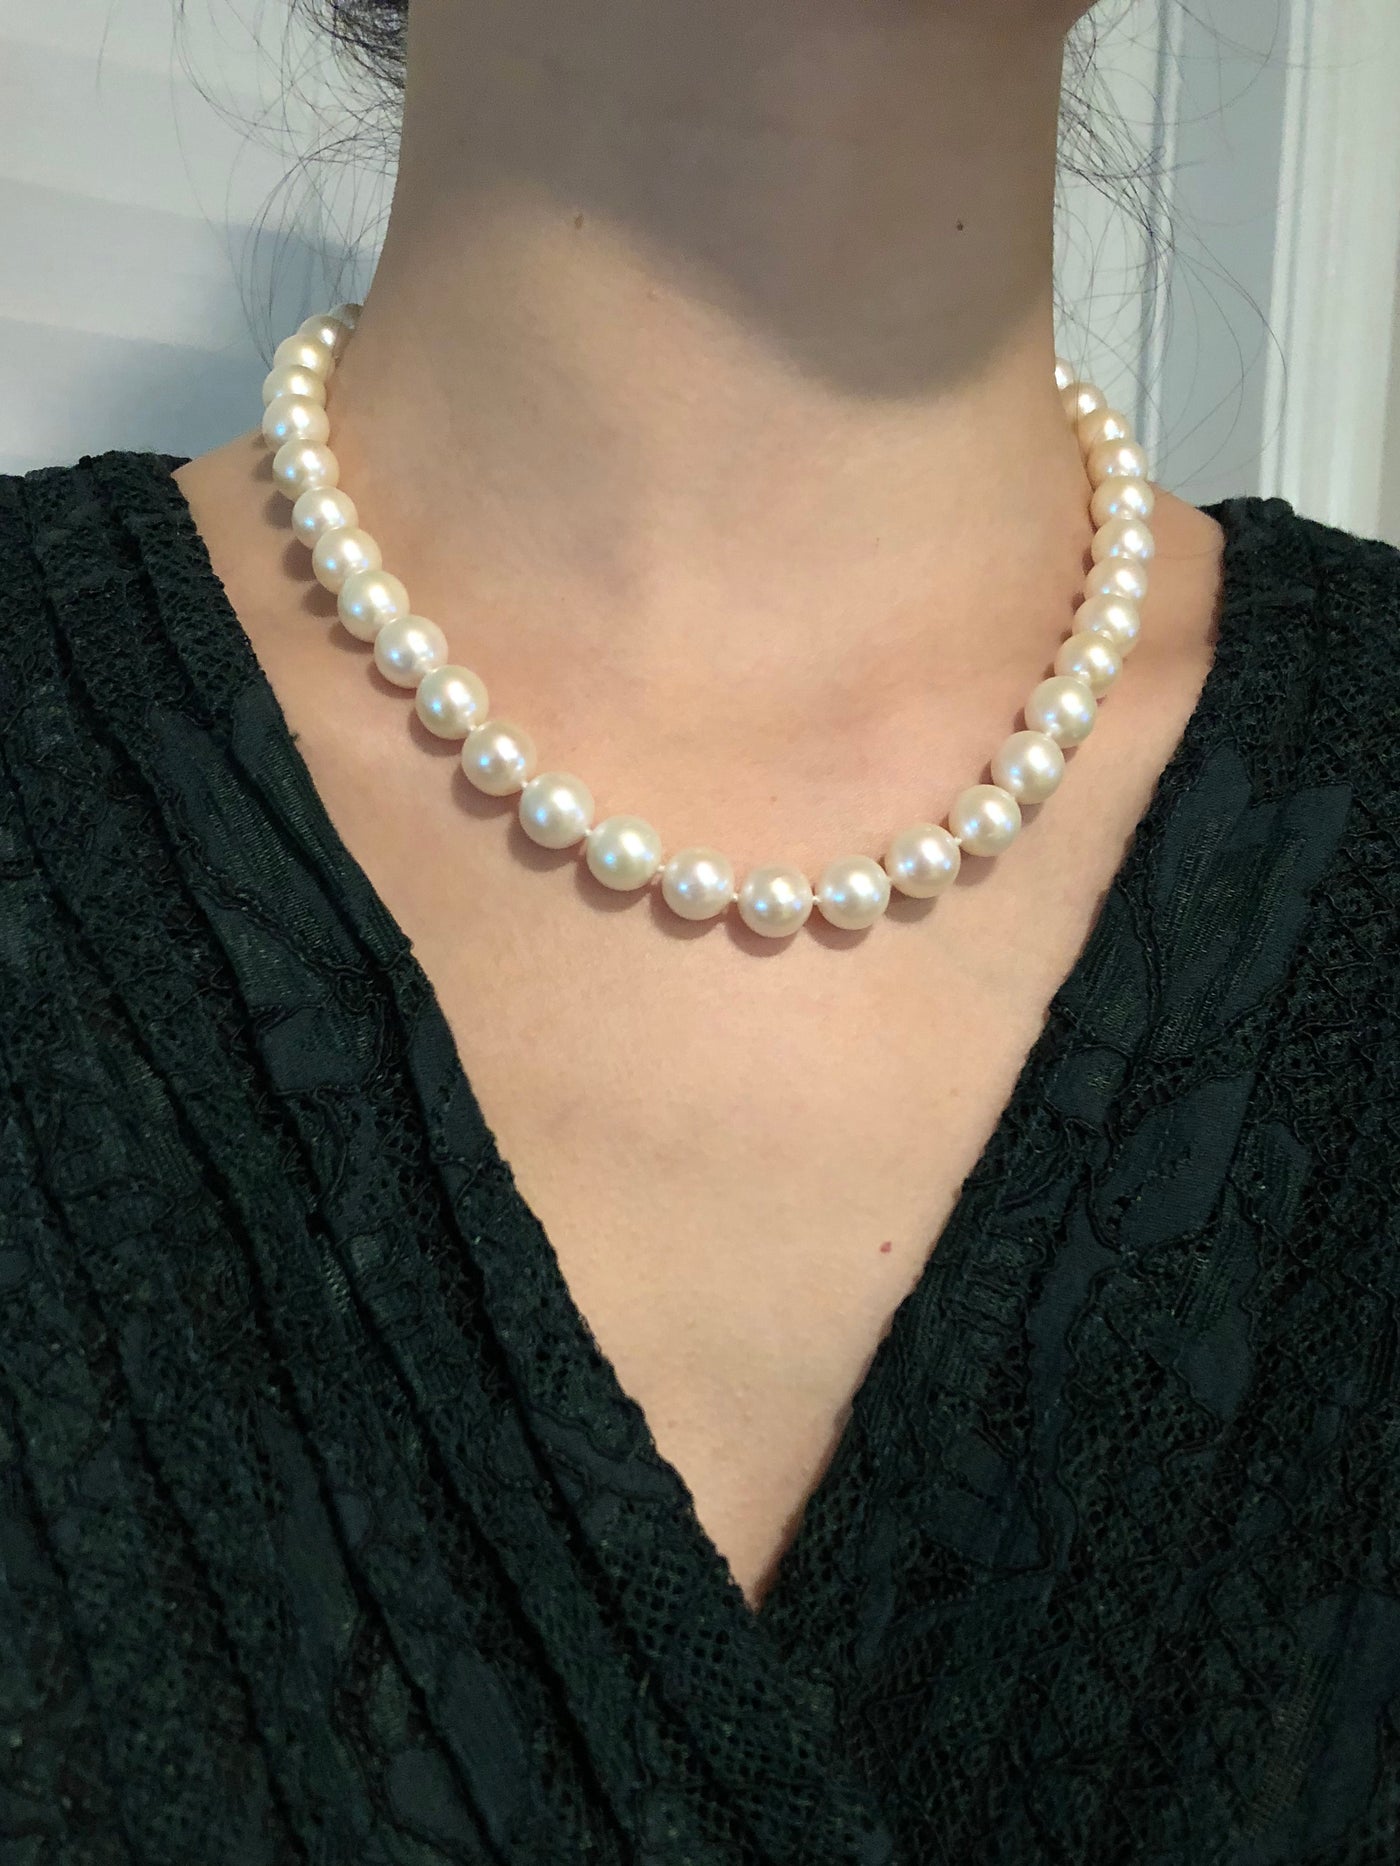 14K Gold Large 9-10mm AAA Quality Cultured Pearl Necklace 18 inches Princess Length